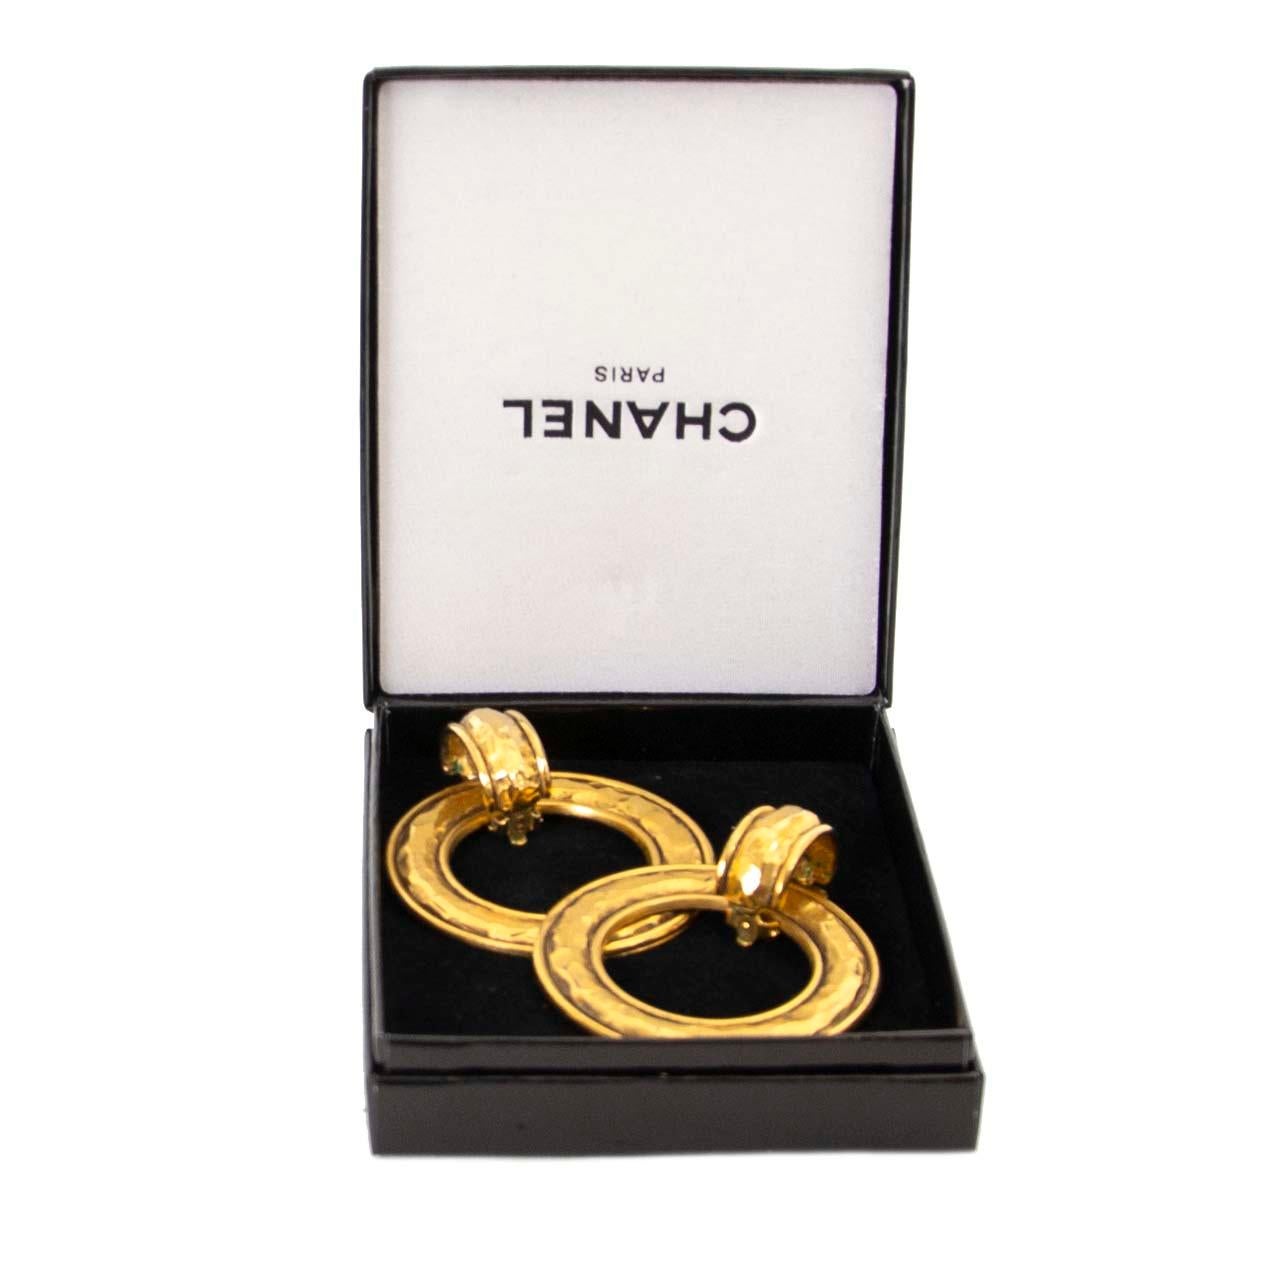 Very good condition

Chanel Gold Hoop Clip-on Earrings

A classic that every woman needs in her jewellery collection is a pair of hoop earrings. This Chanel pair in gold fits the trend perfectly and will never go out of style. Pair with a crisp